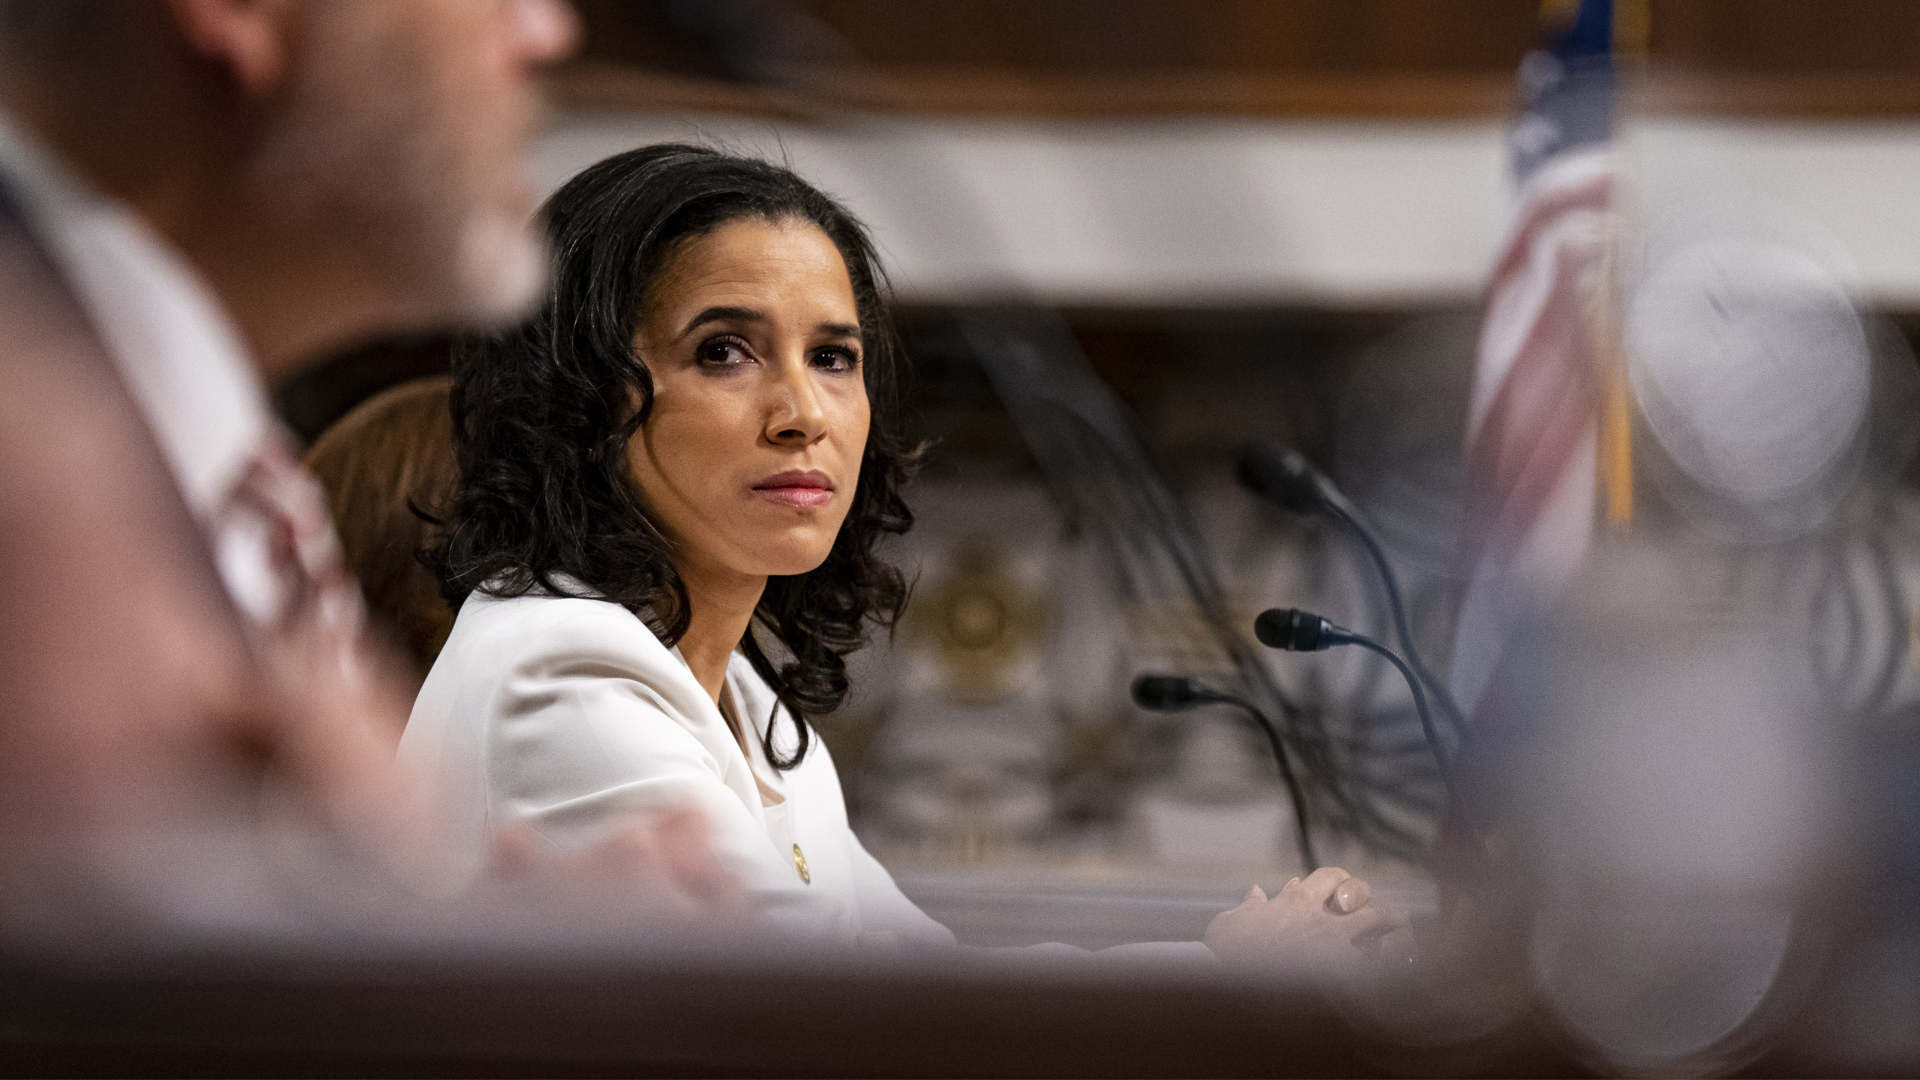 A woman listens to another speaker during a hearing in an official capacity.